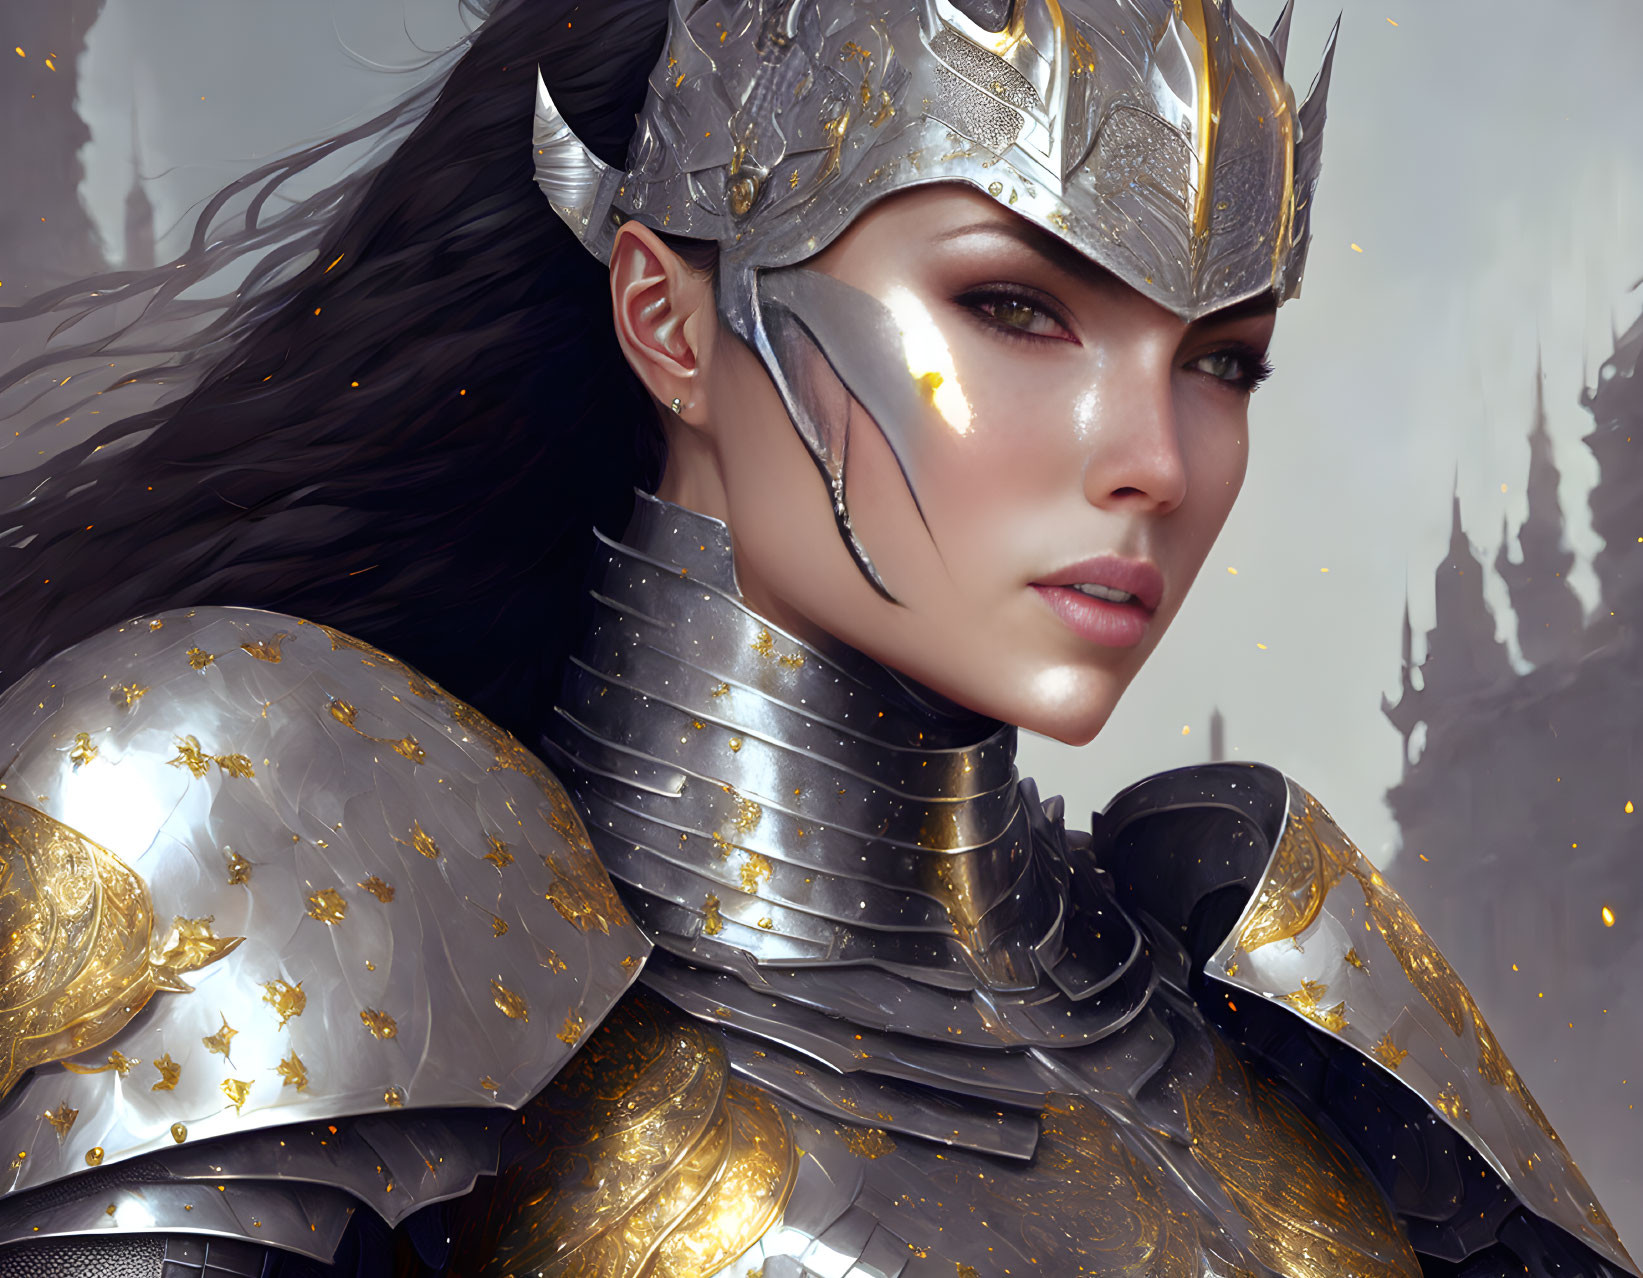 Detailed Illustration: Woman in Ornate Silver Armor with Gold Accents